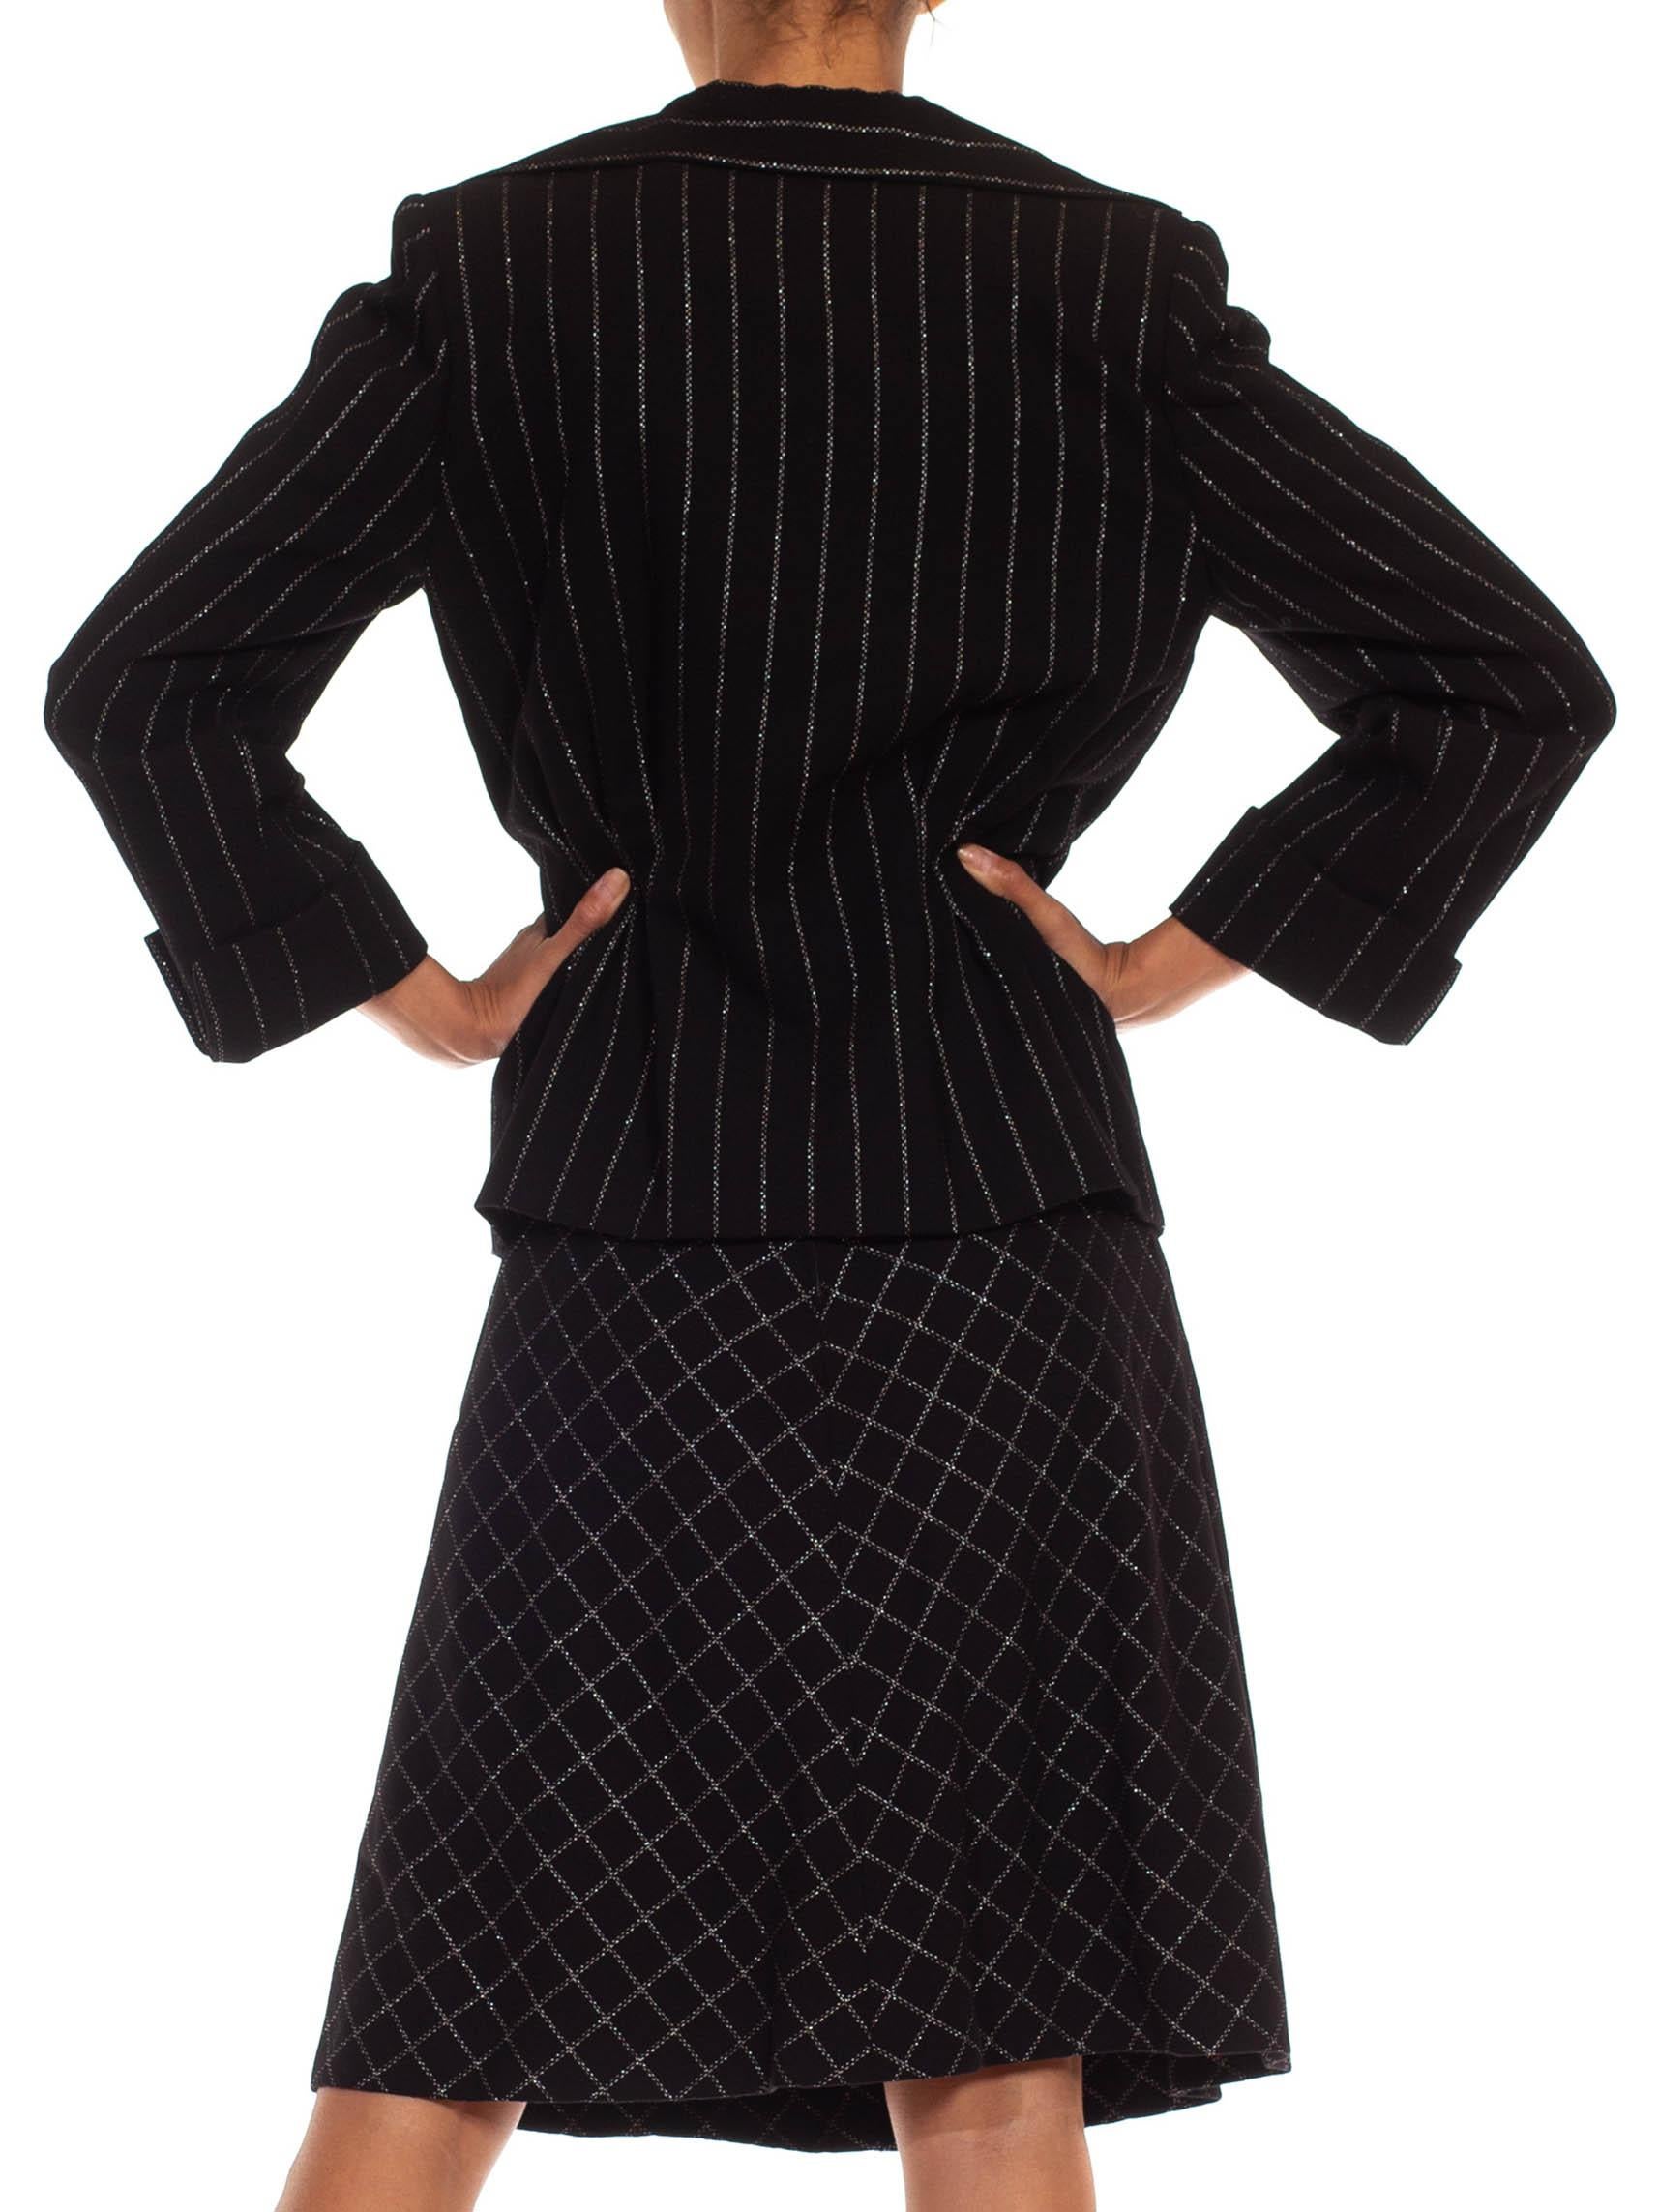 1970S PAULINE TRIGERE Black Silver Lamé Bias Skirt Suit With Silk Lining For Sale 7